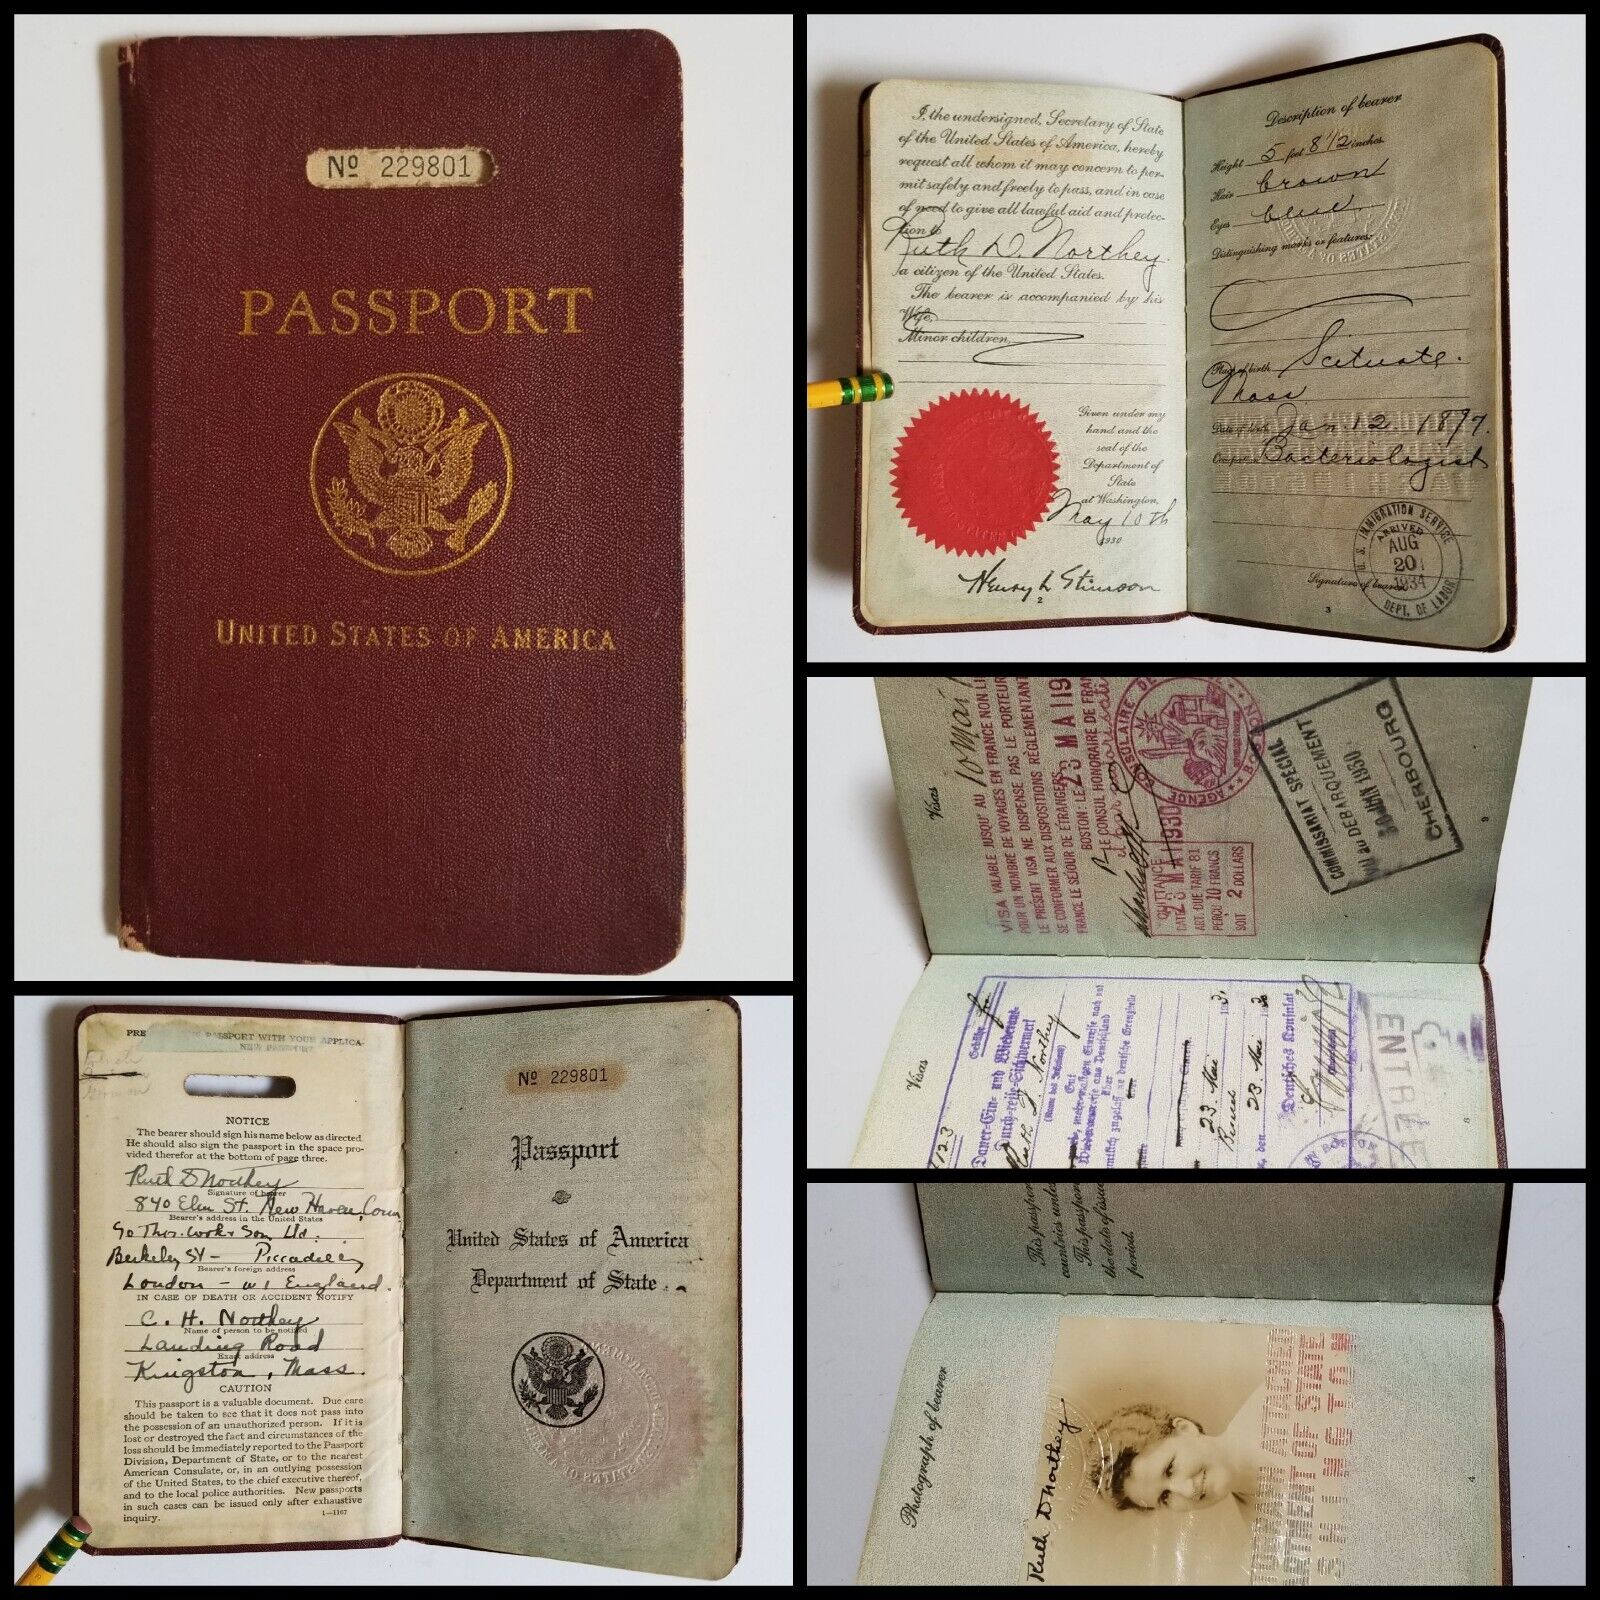 10 May 1930 Issued United States of America Passport to a Woman